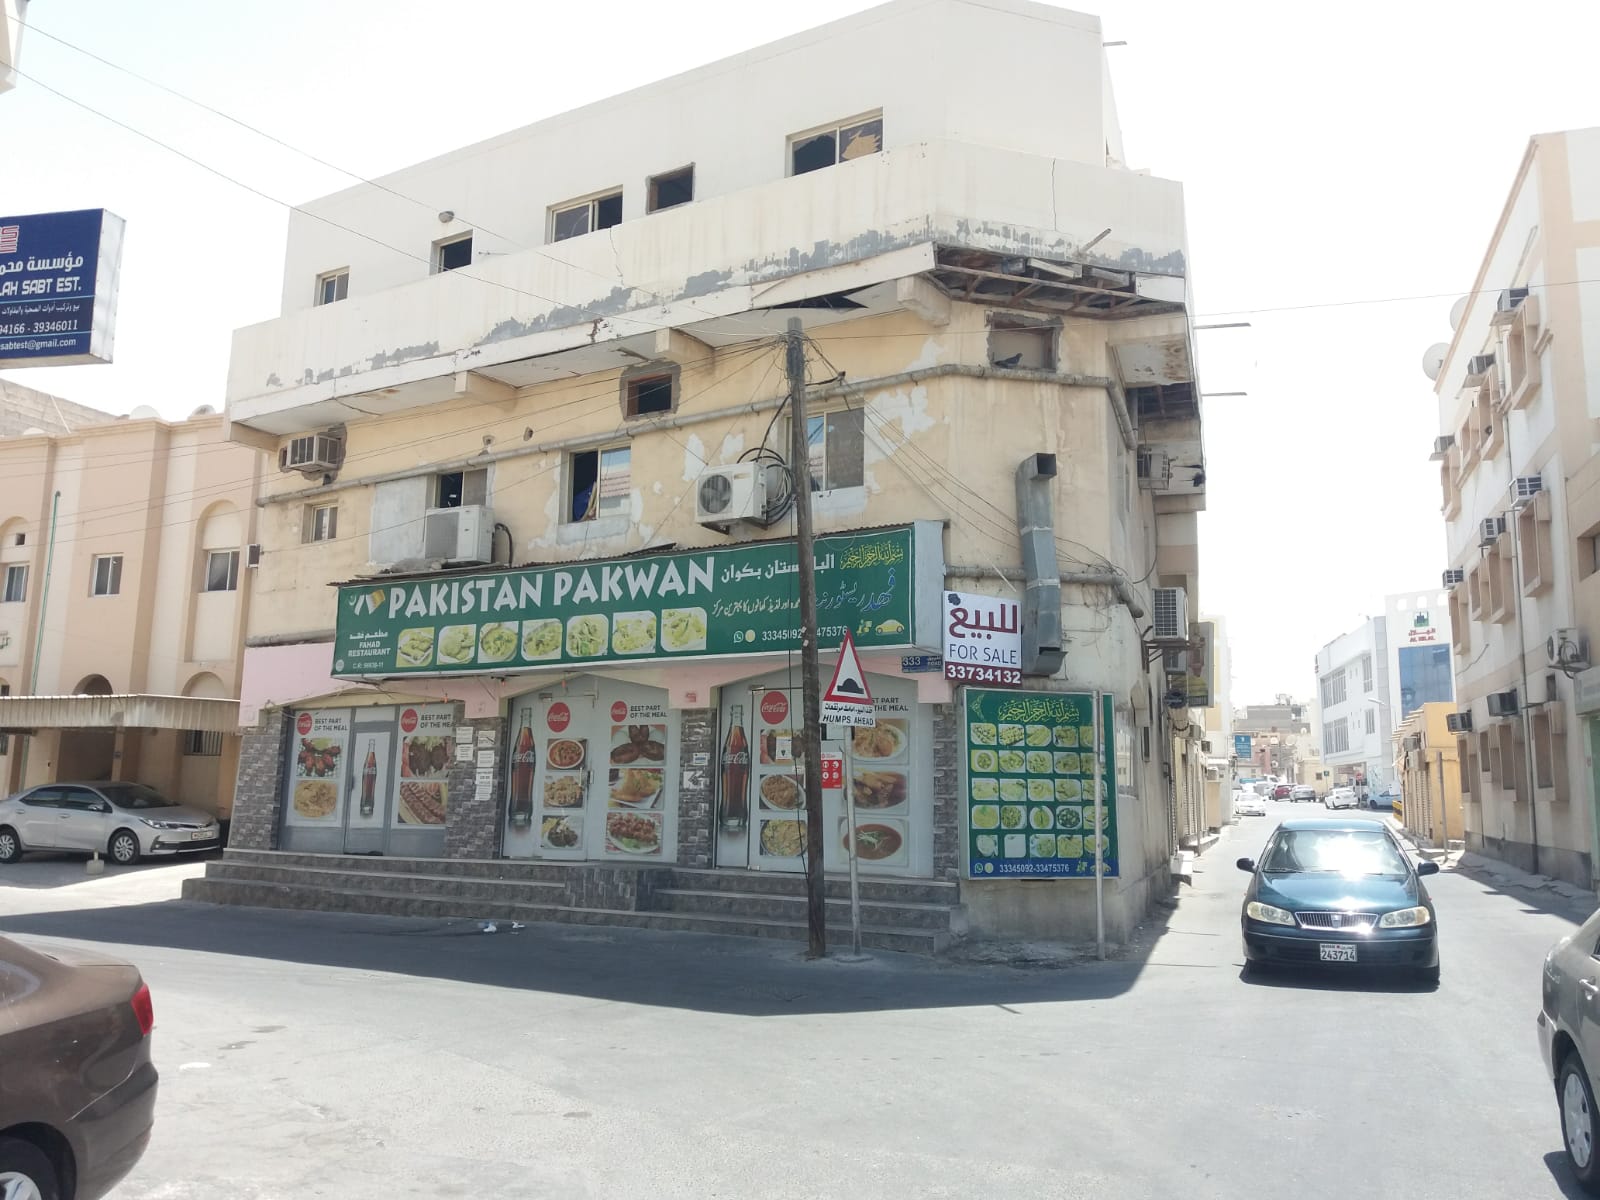 For Sale A Commercial Building, Ground Floor And Two Floors, In The Eastern Market Of Riffa